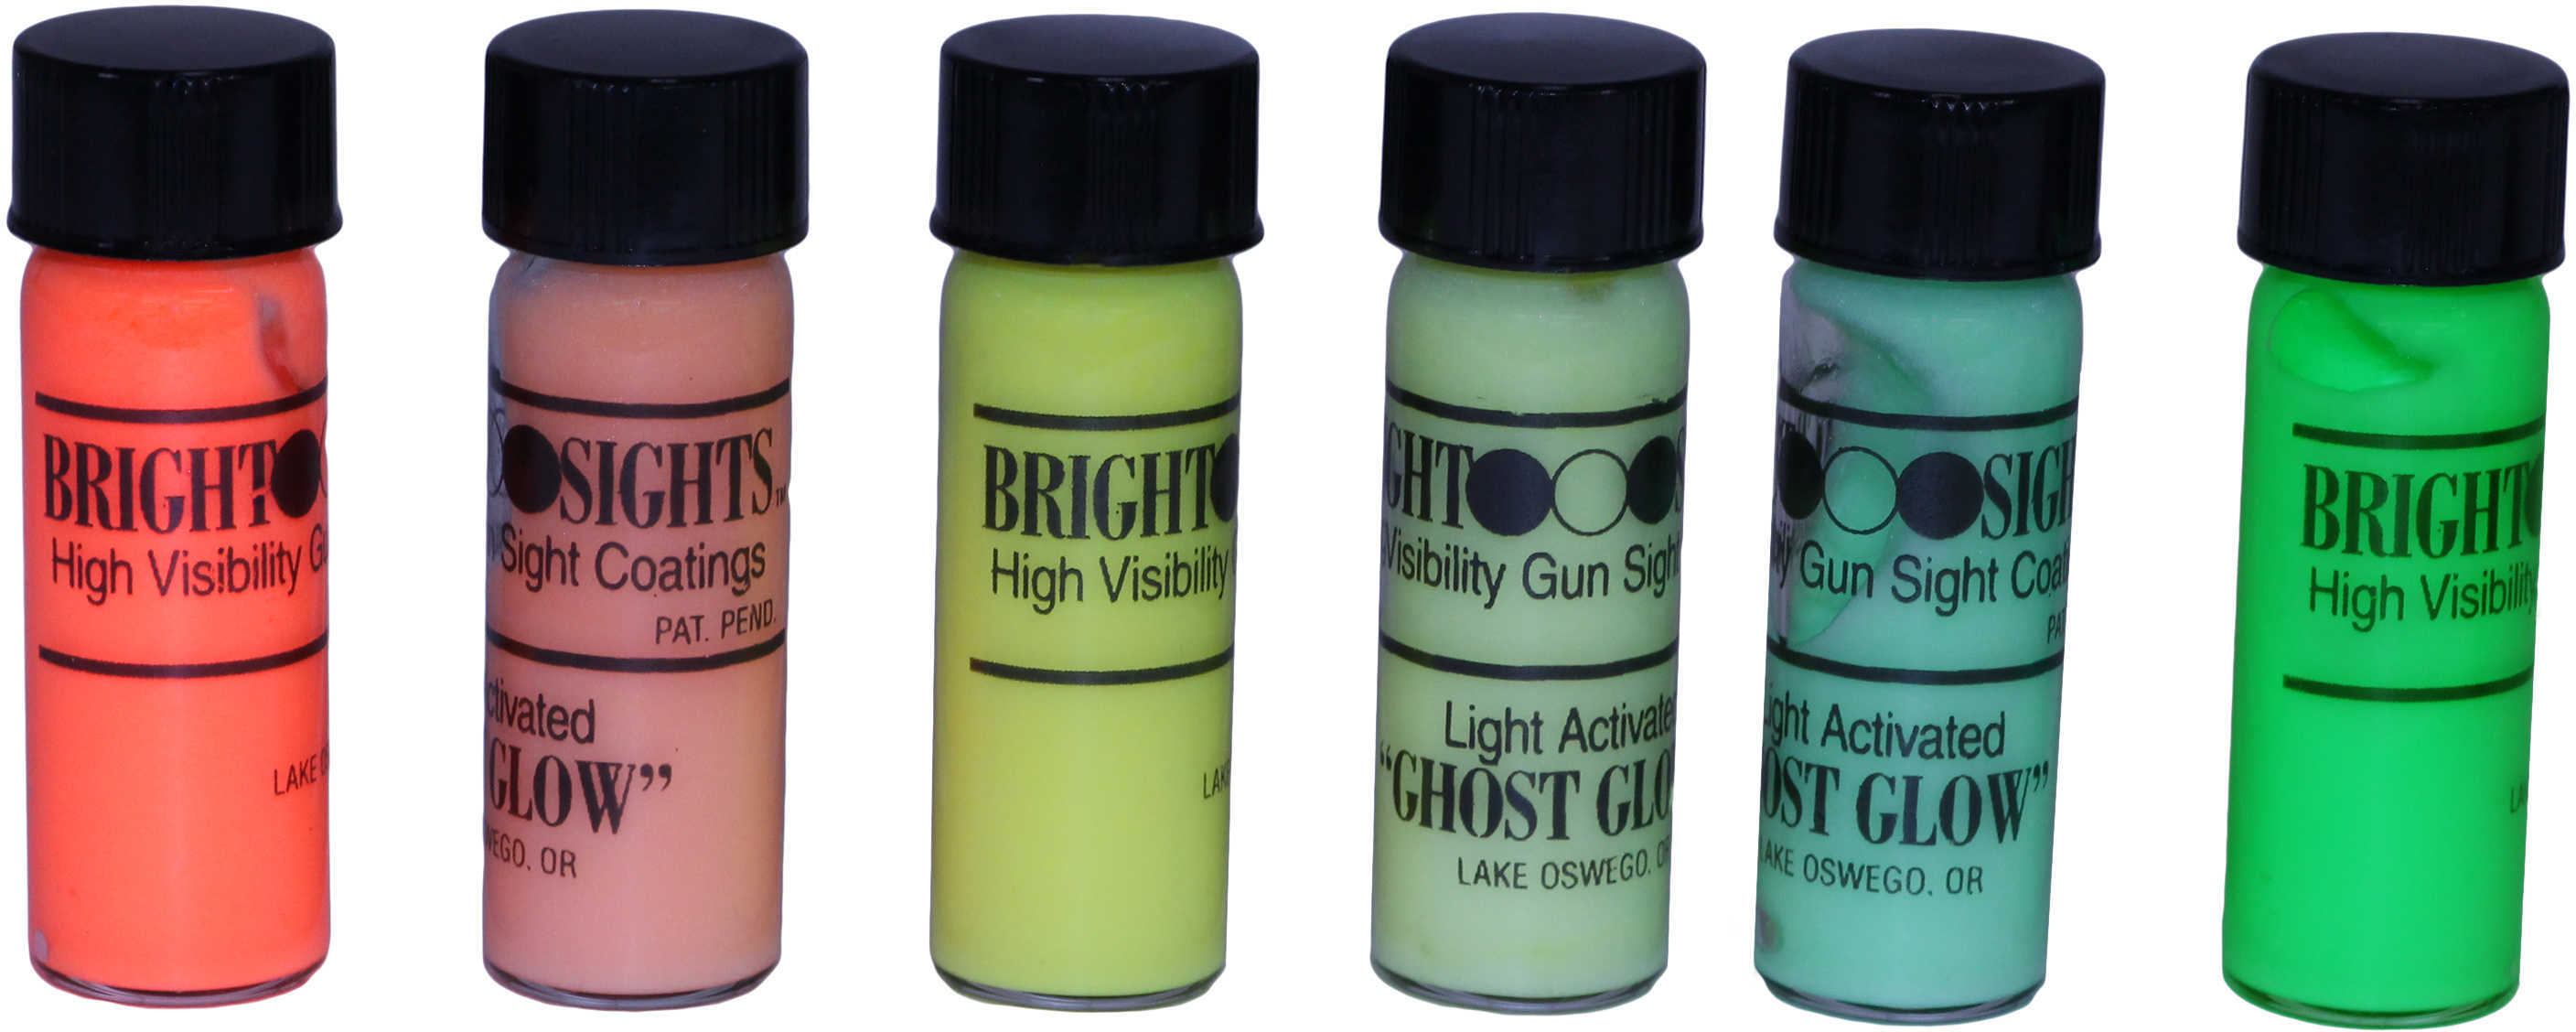 Truglo Paint Ghost Glow Kit Md: TG985B - 11151696